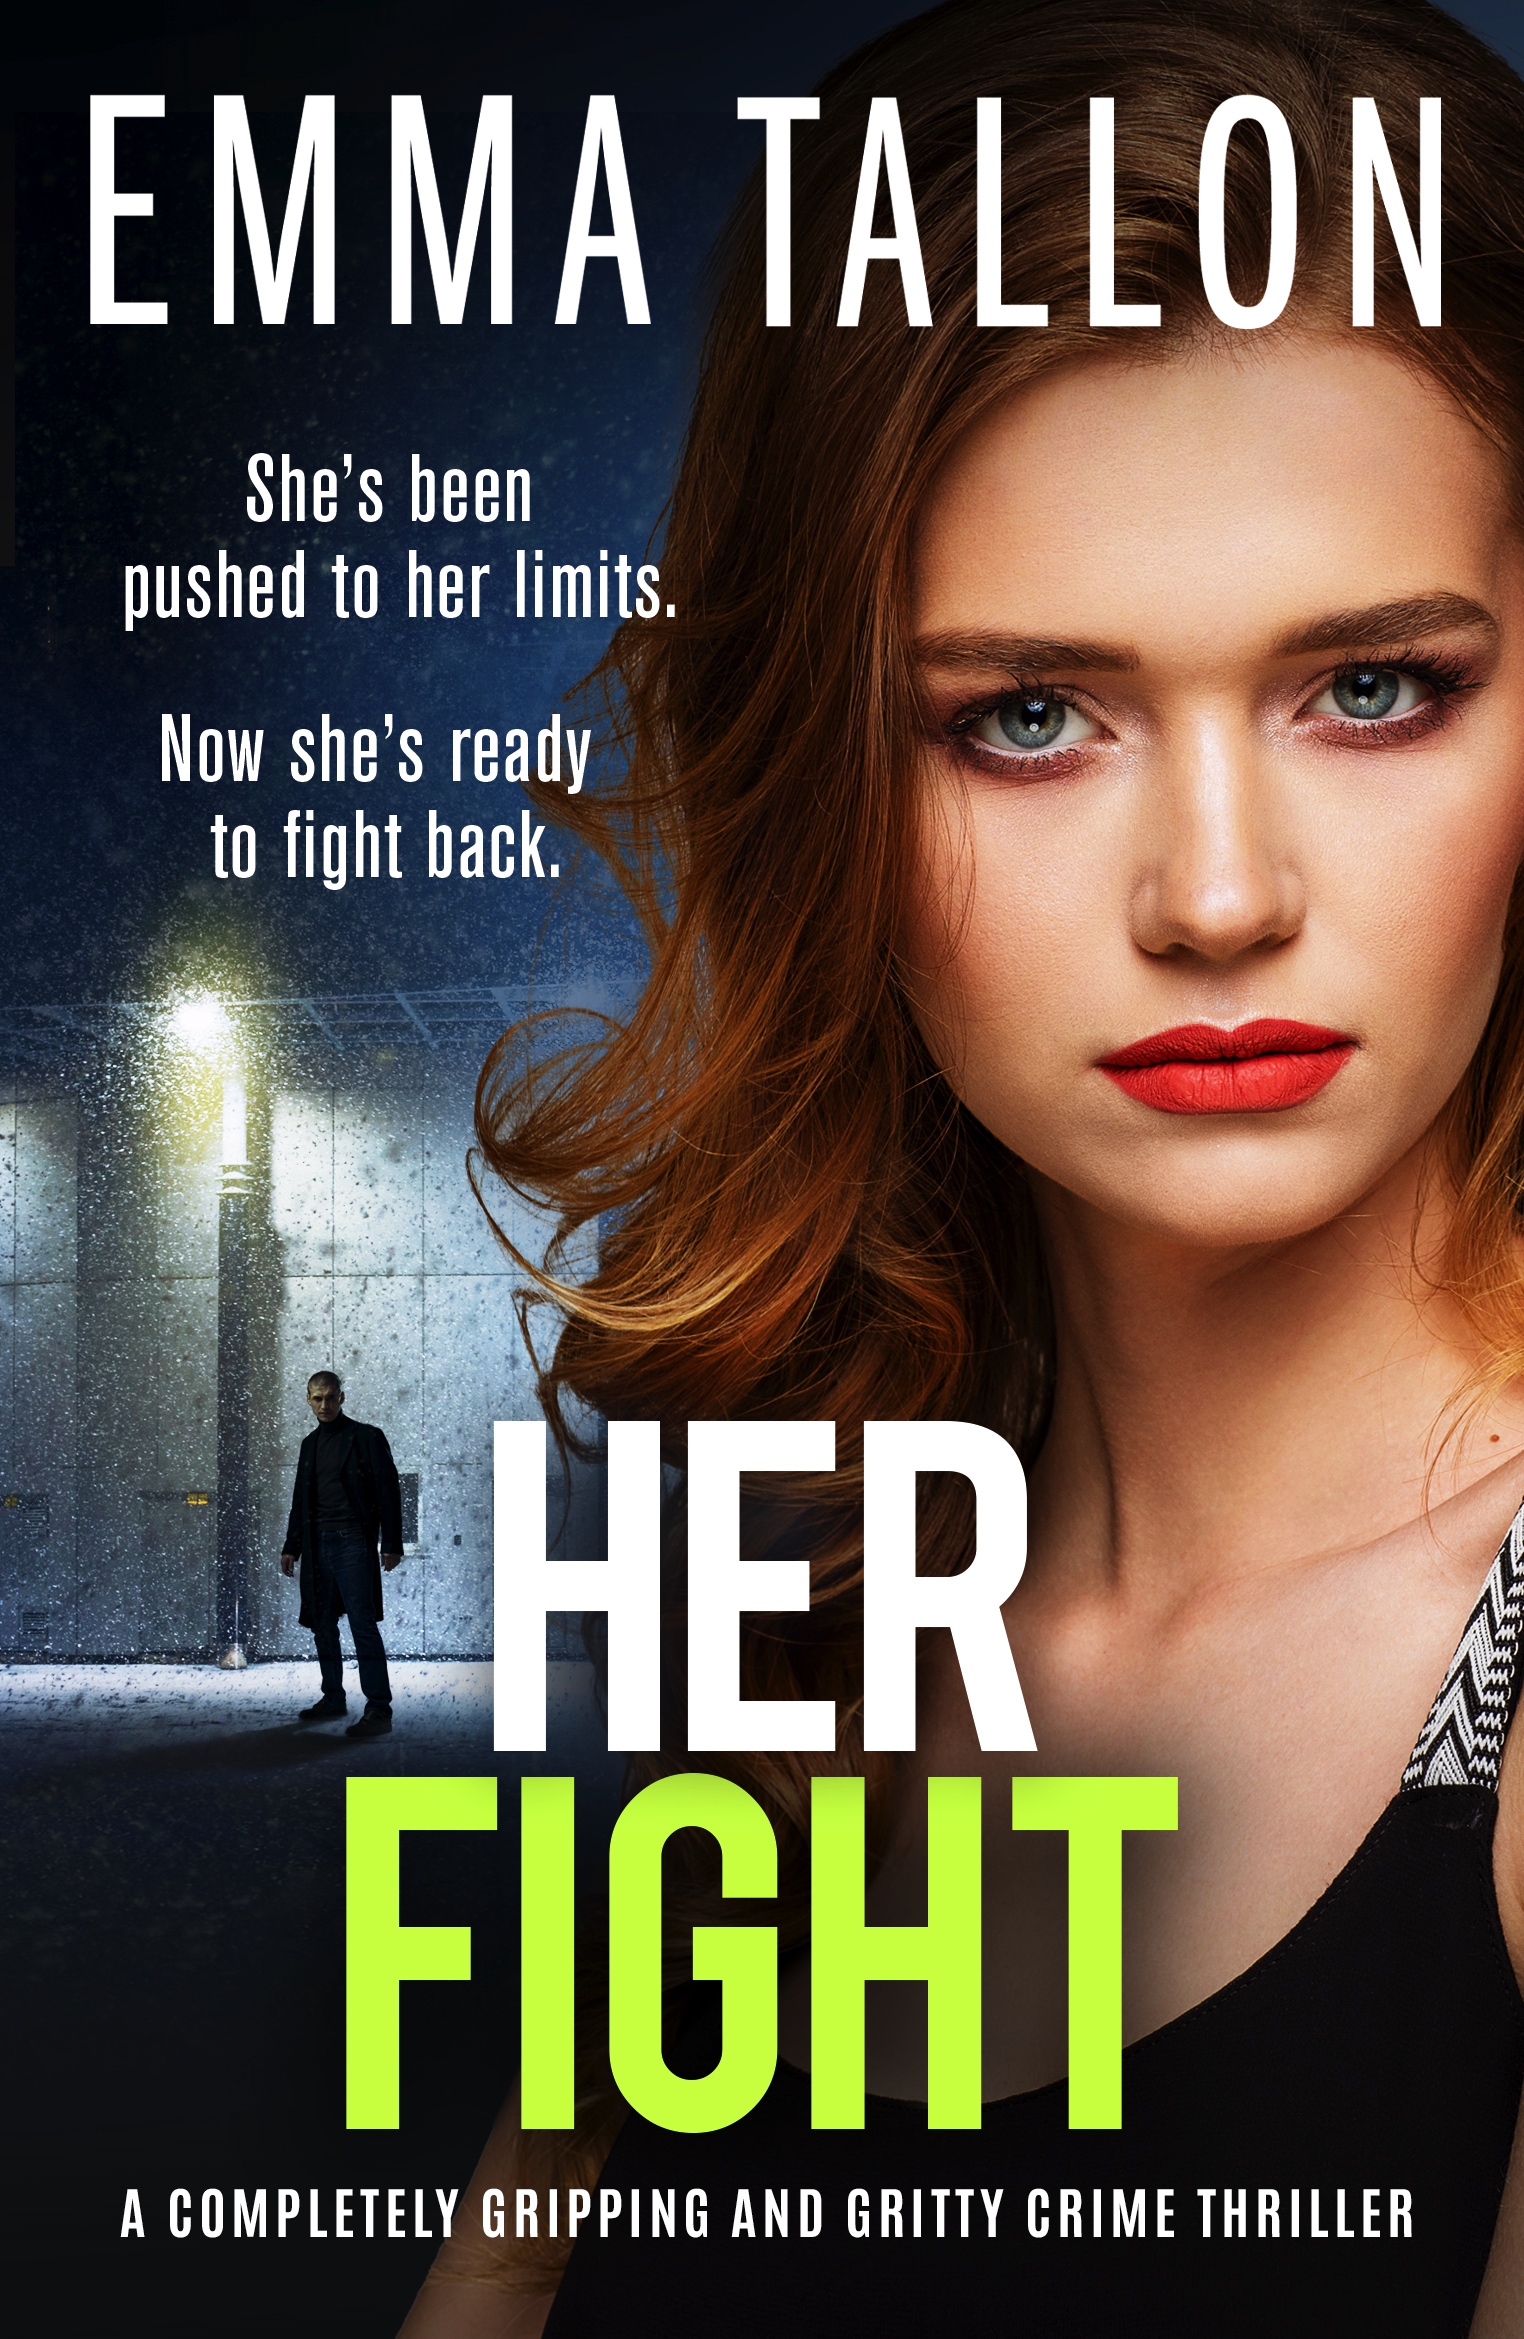 Her Fight book cover